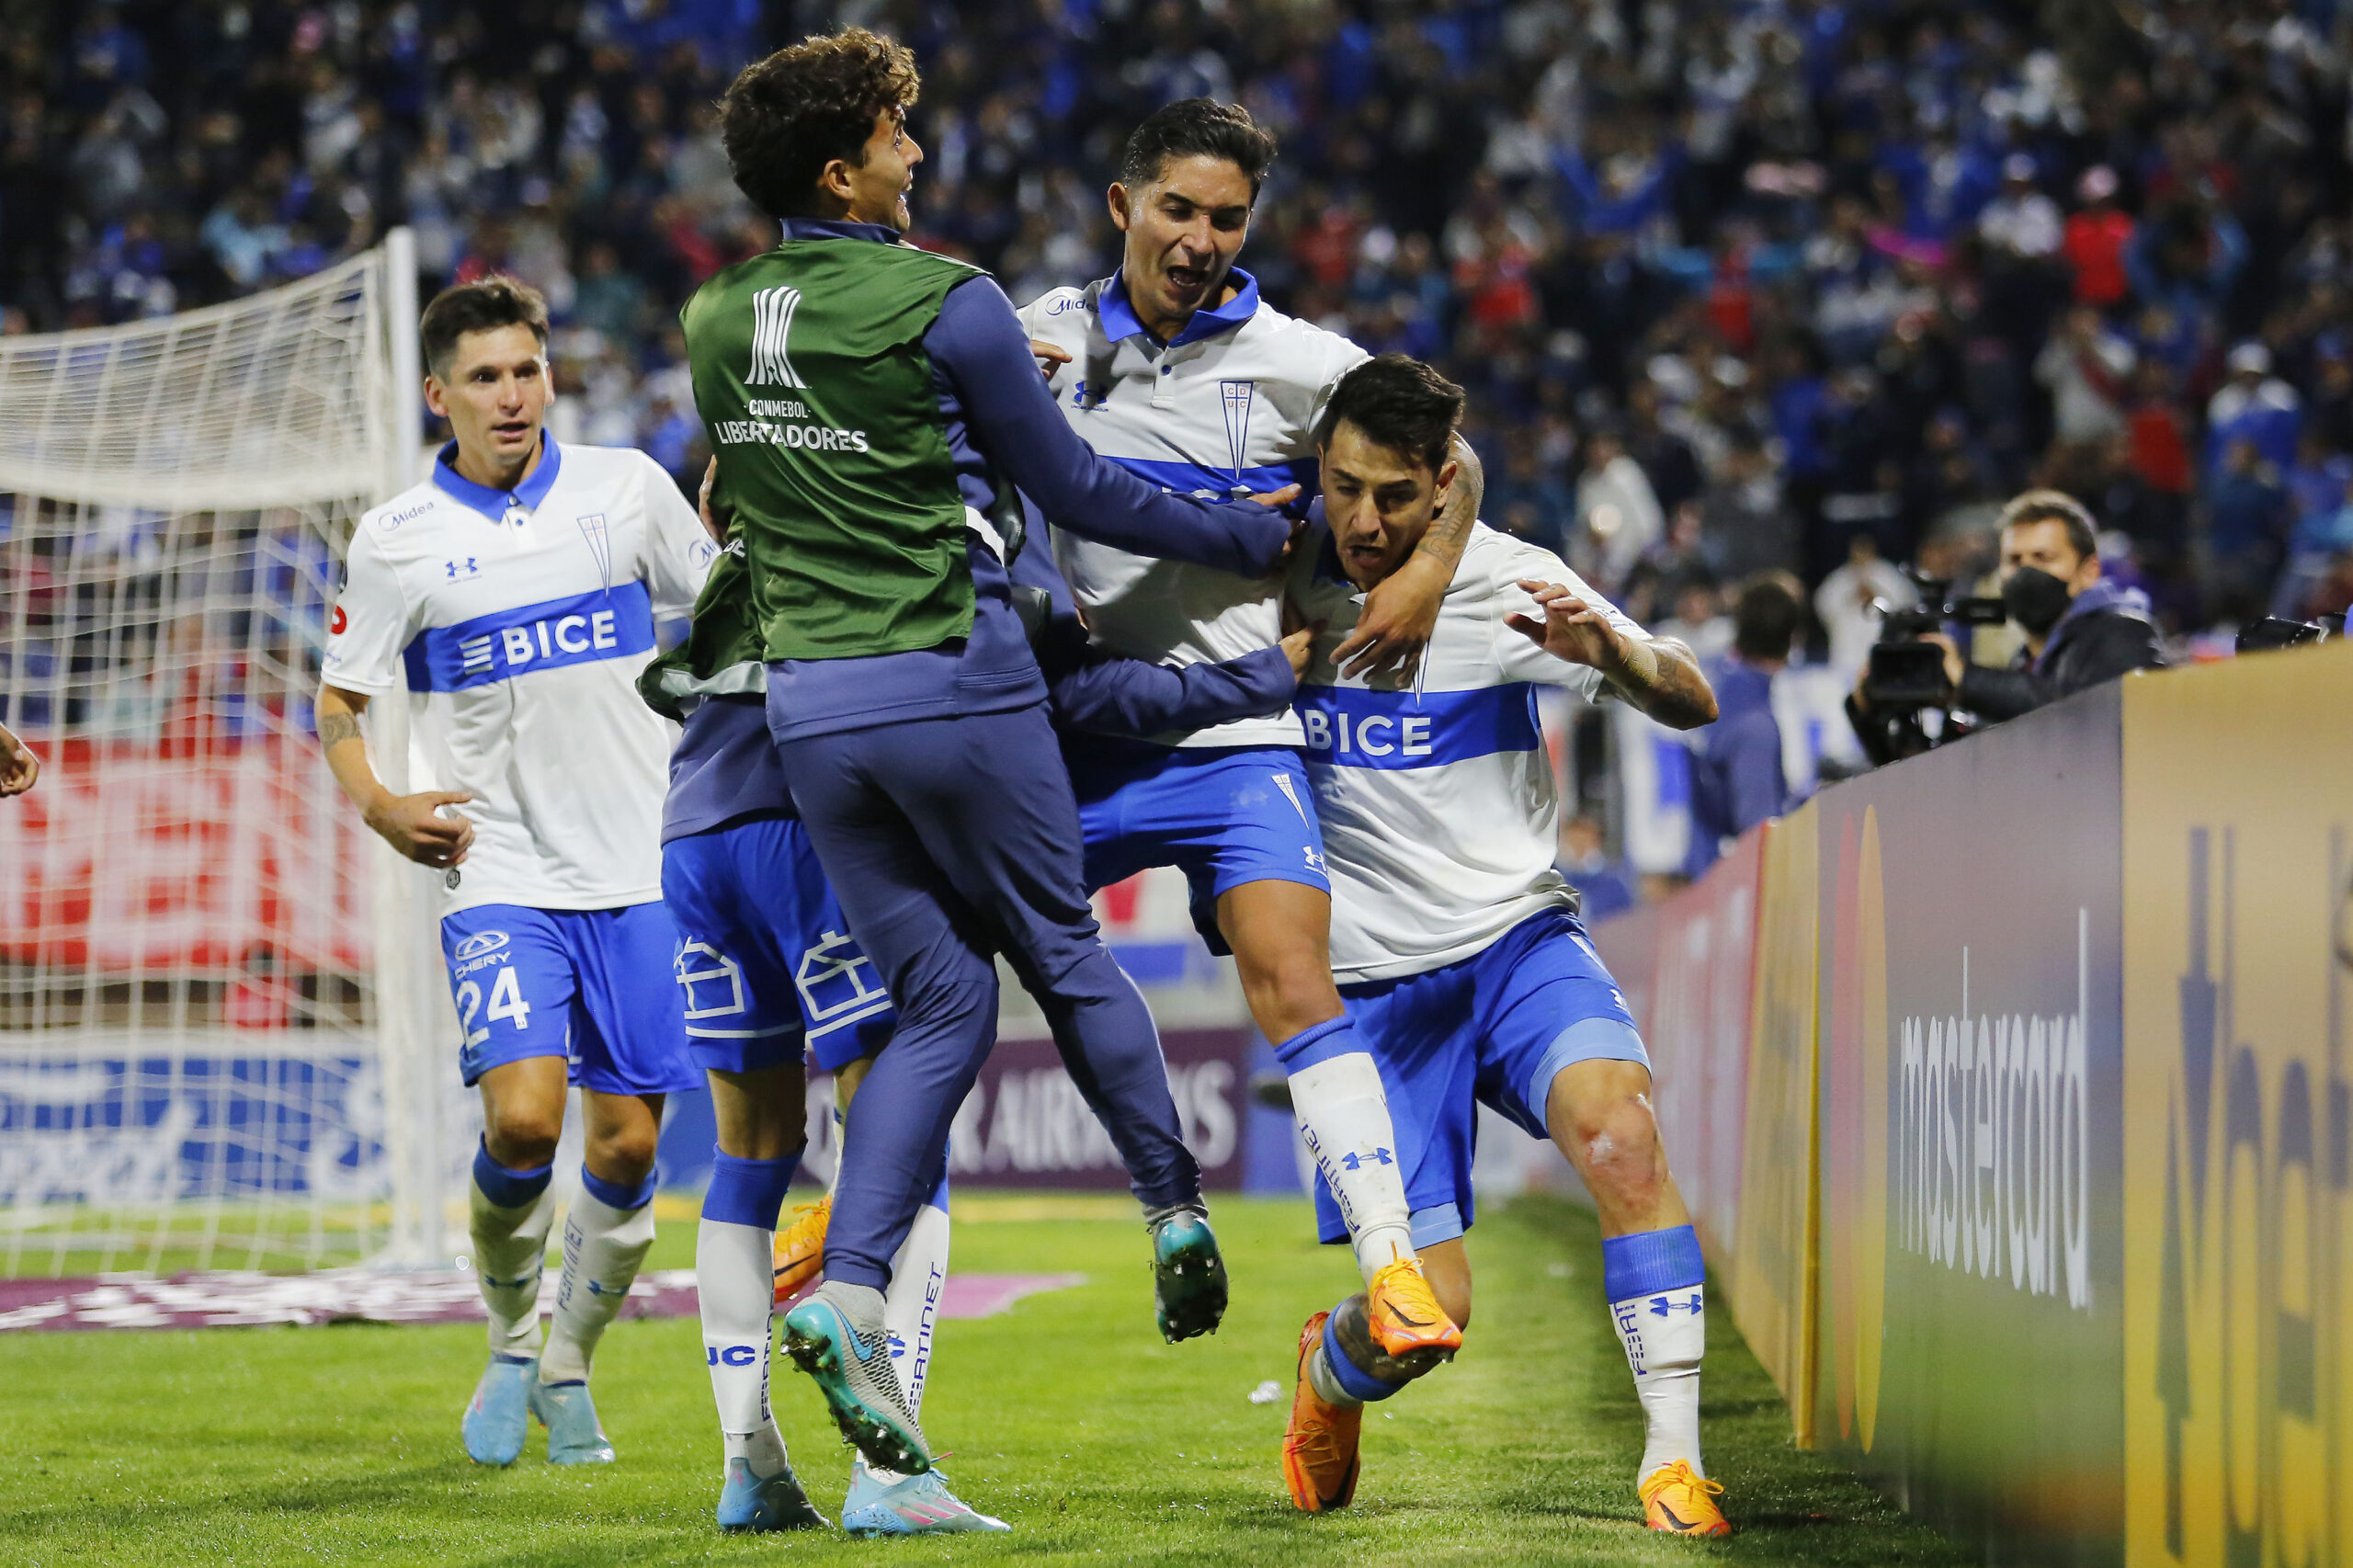 SANTIAGO, CHILE - APRIL 12: Fernando Zampedri (R) of Universidad Catolica celebrates with teammates after scoring the second goal of his team during a match between Universidad Catolica and Sporting Cristal as part of Copa CONMEBOL Libertadores 2022 at San Carlos de Apoquindo Stadium on April 12, 2022 in Santiago, Chile. (Photo by Marcelo Hernandez/Getty Images)